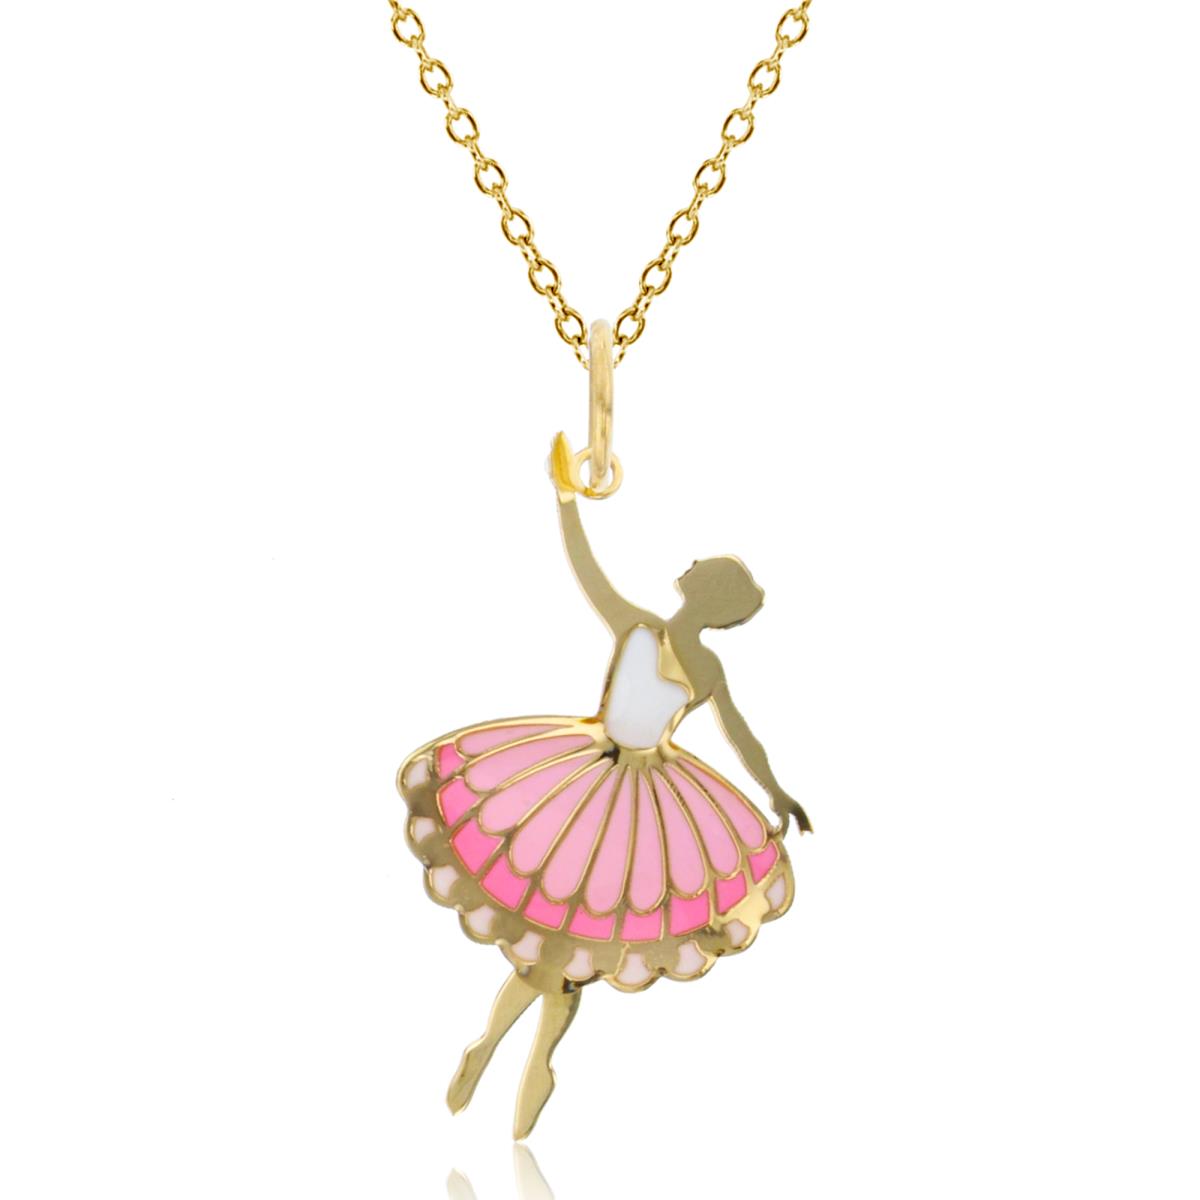 14K Yellow Gold White & Pink Enamel 29x15mm  Ballerina 18" 020 Rolo Chain Necklace